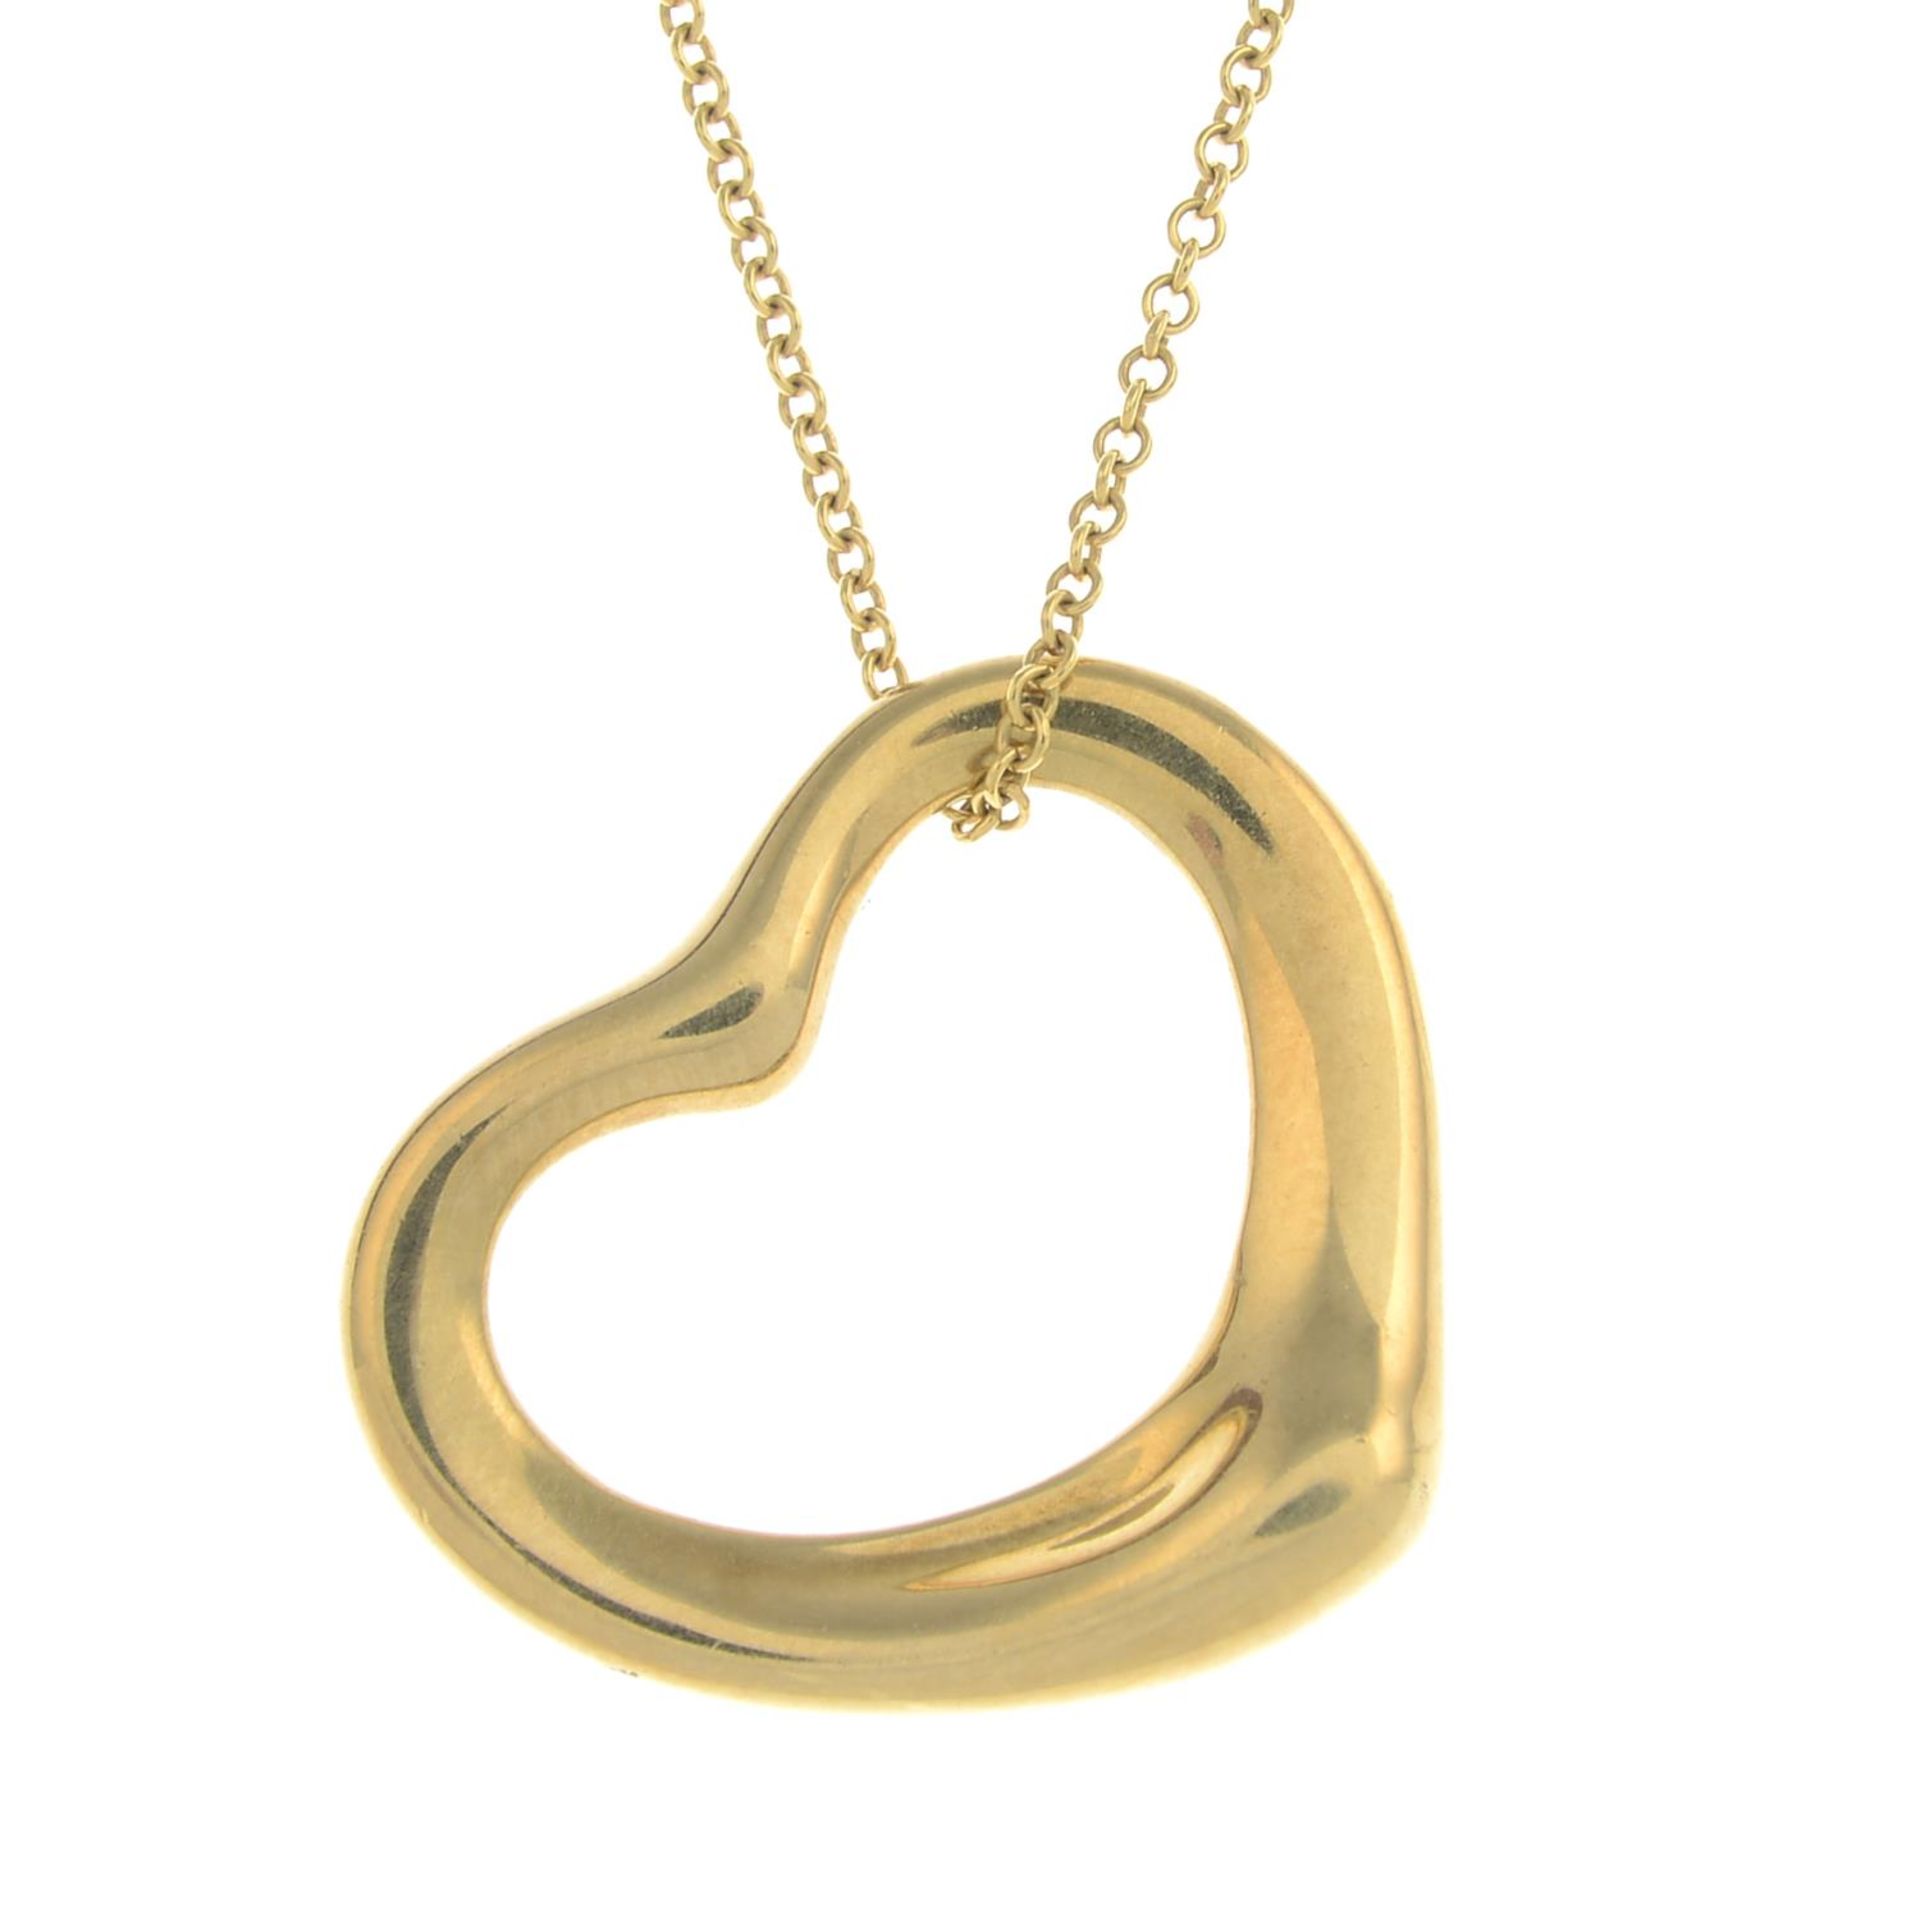 An 'Open Heart' pendant, suspended from a chain, by Elsa Peretti, for Tiffany & Co.